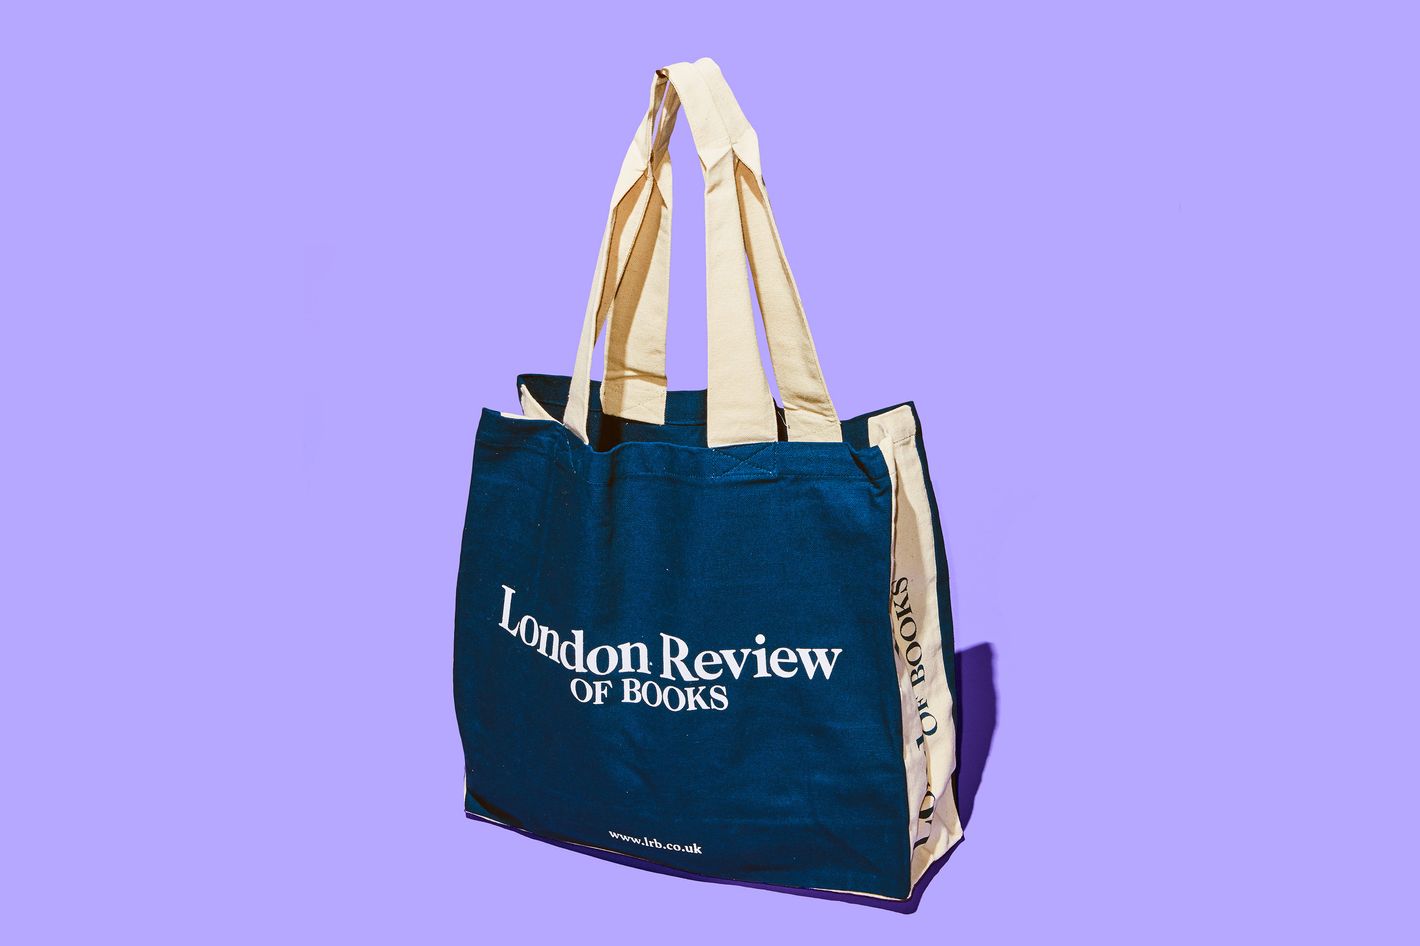 london review of books bag